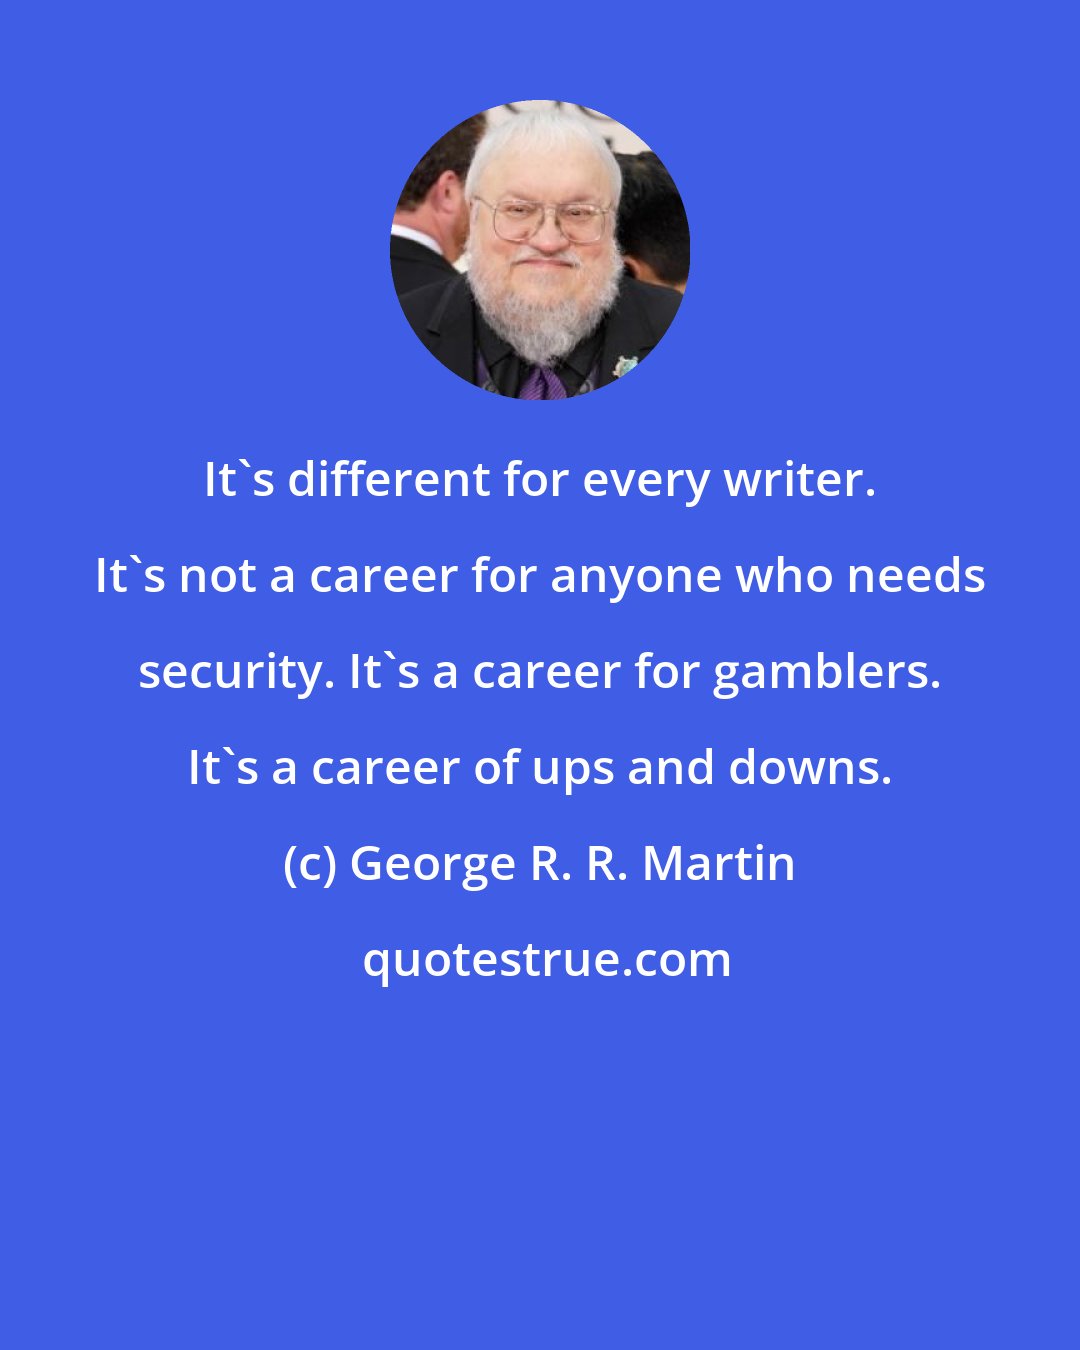 George R. R. Martin: It's different for every writer. It's not a career for anyone who needs security. It's a career for gamblers. It's a career of ups and downs.